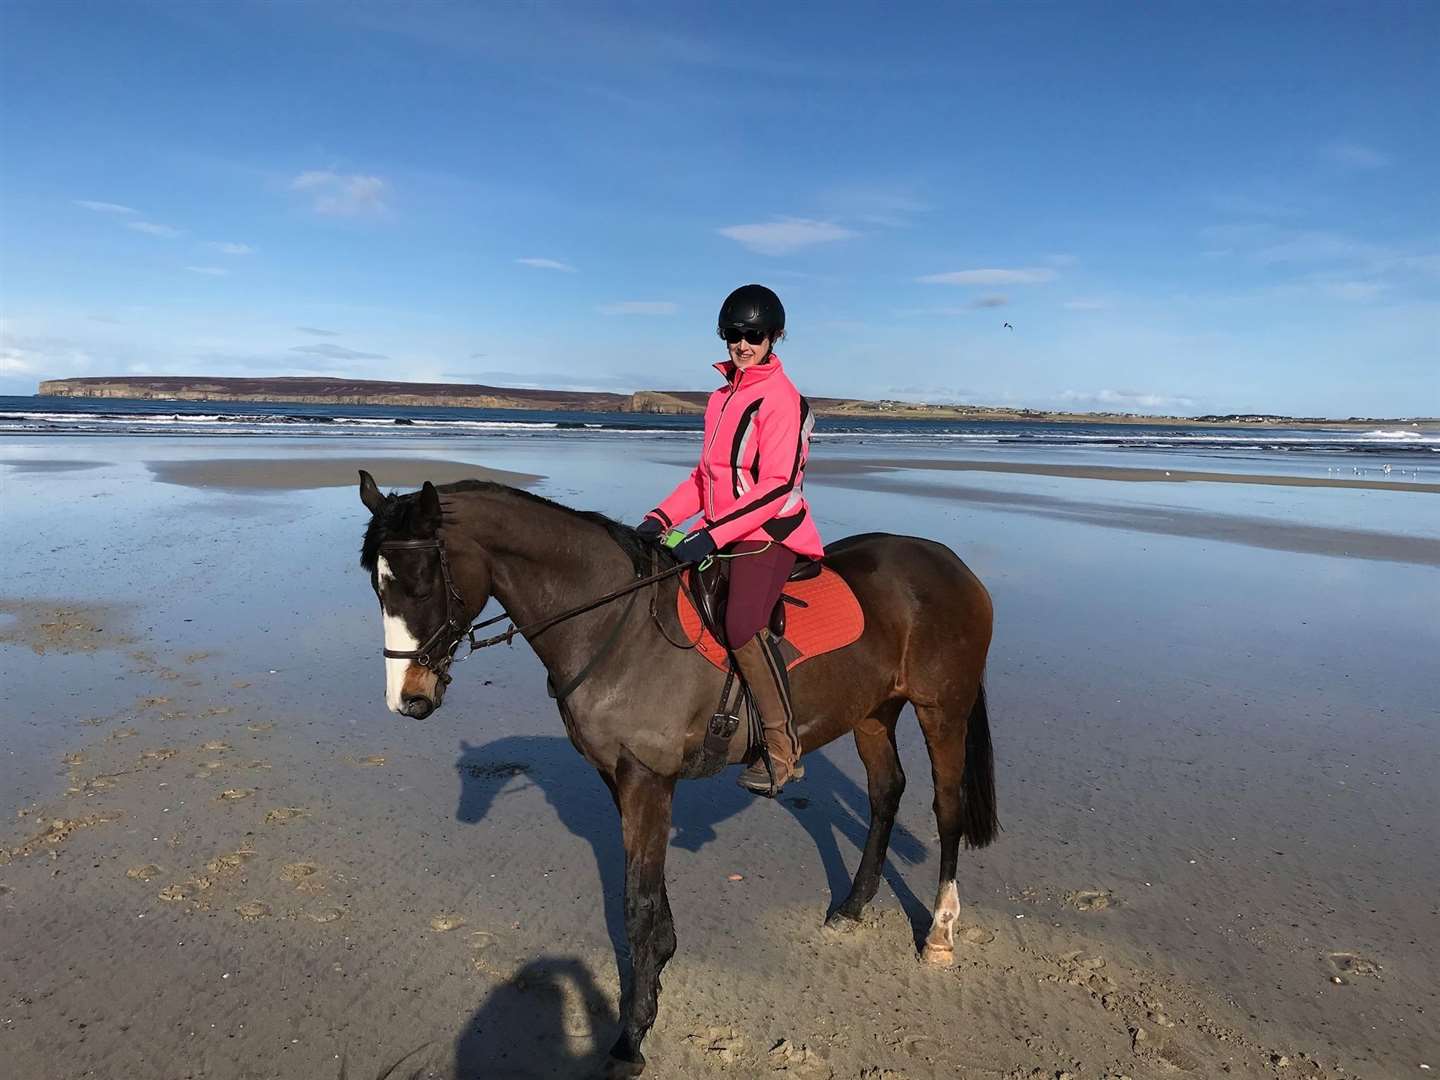 Local rider Lesley Forrest is among those thankful that the council took prompt action to correct the sign. She said: "It is a great relief that horse riders will still have access to the beach."